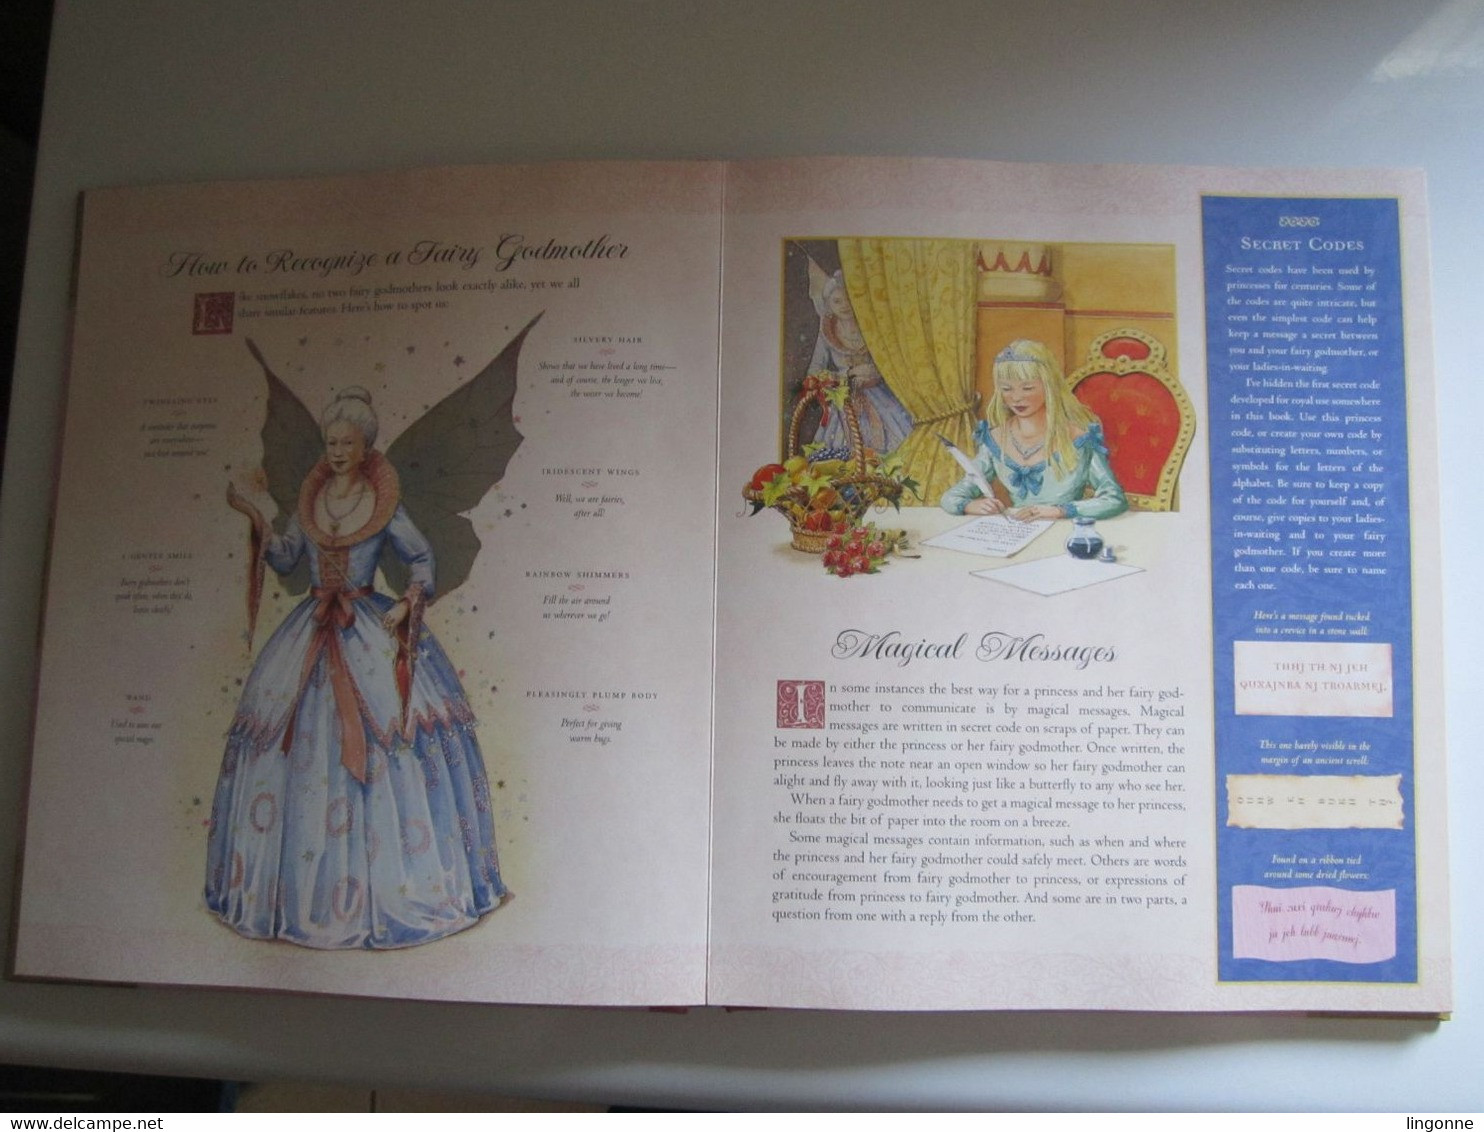 A Princess Primer: A Fairy Godmothers Guide to Being a Princess by Stephanie - Copright 2006